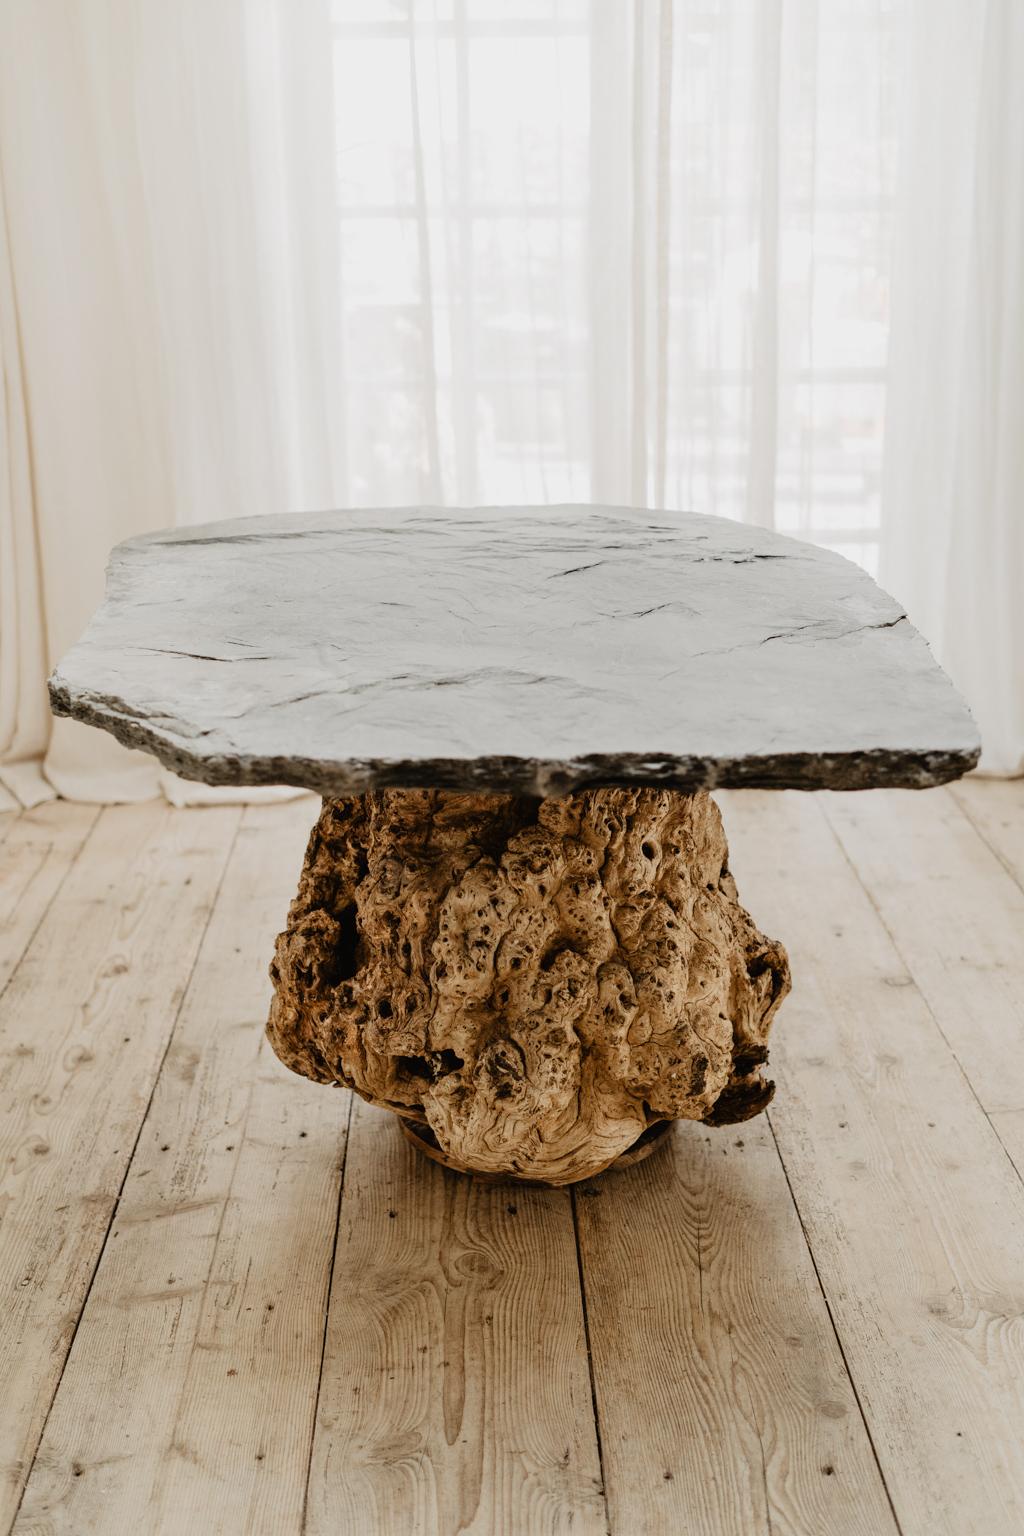 A unique piece this Belgian slate topped table on burr chestnut treetrunk base ..
A statement in your interior ... or in your garden.